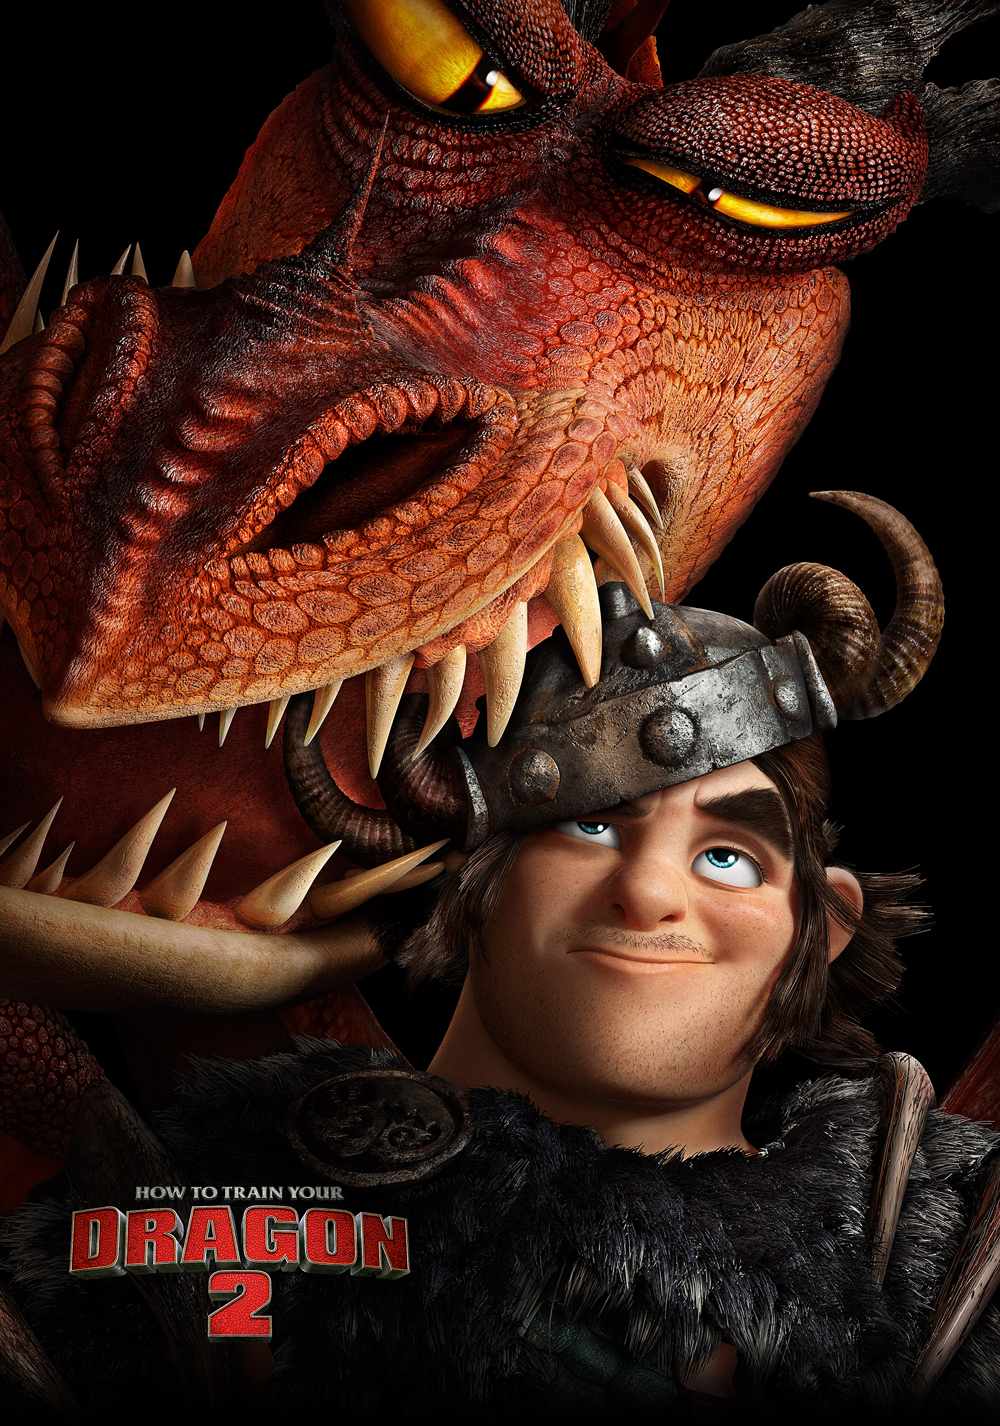 How to Train Your Dragon 2 Art